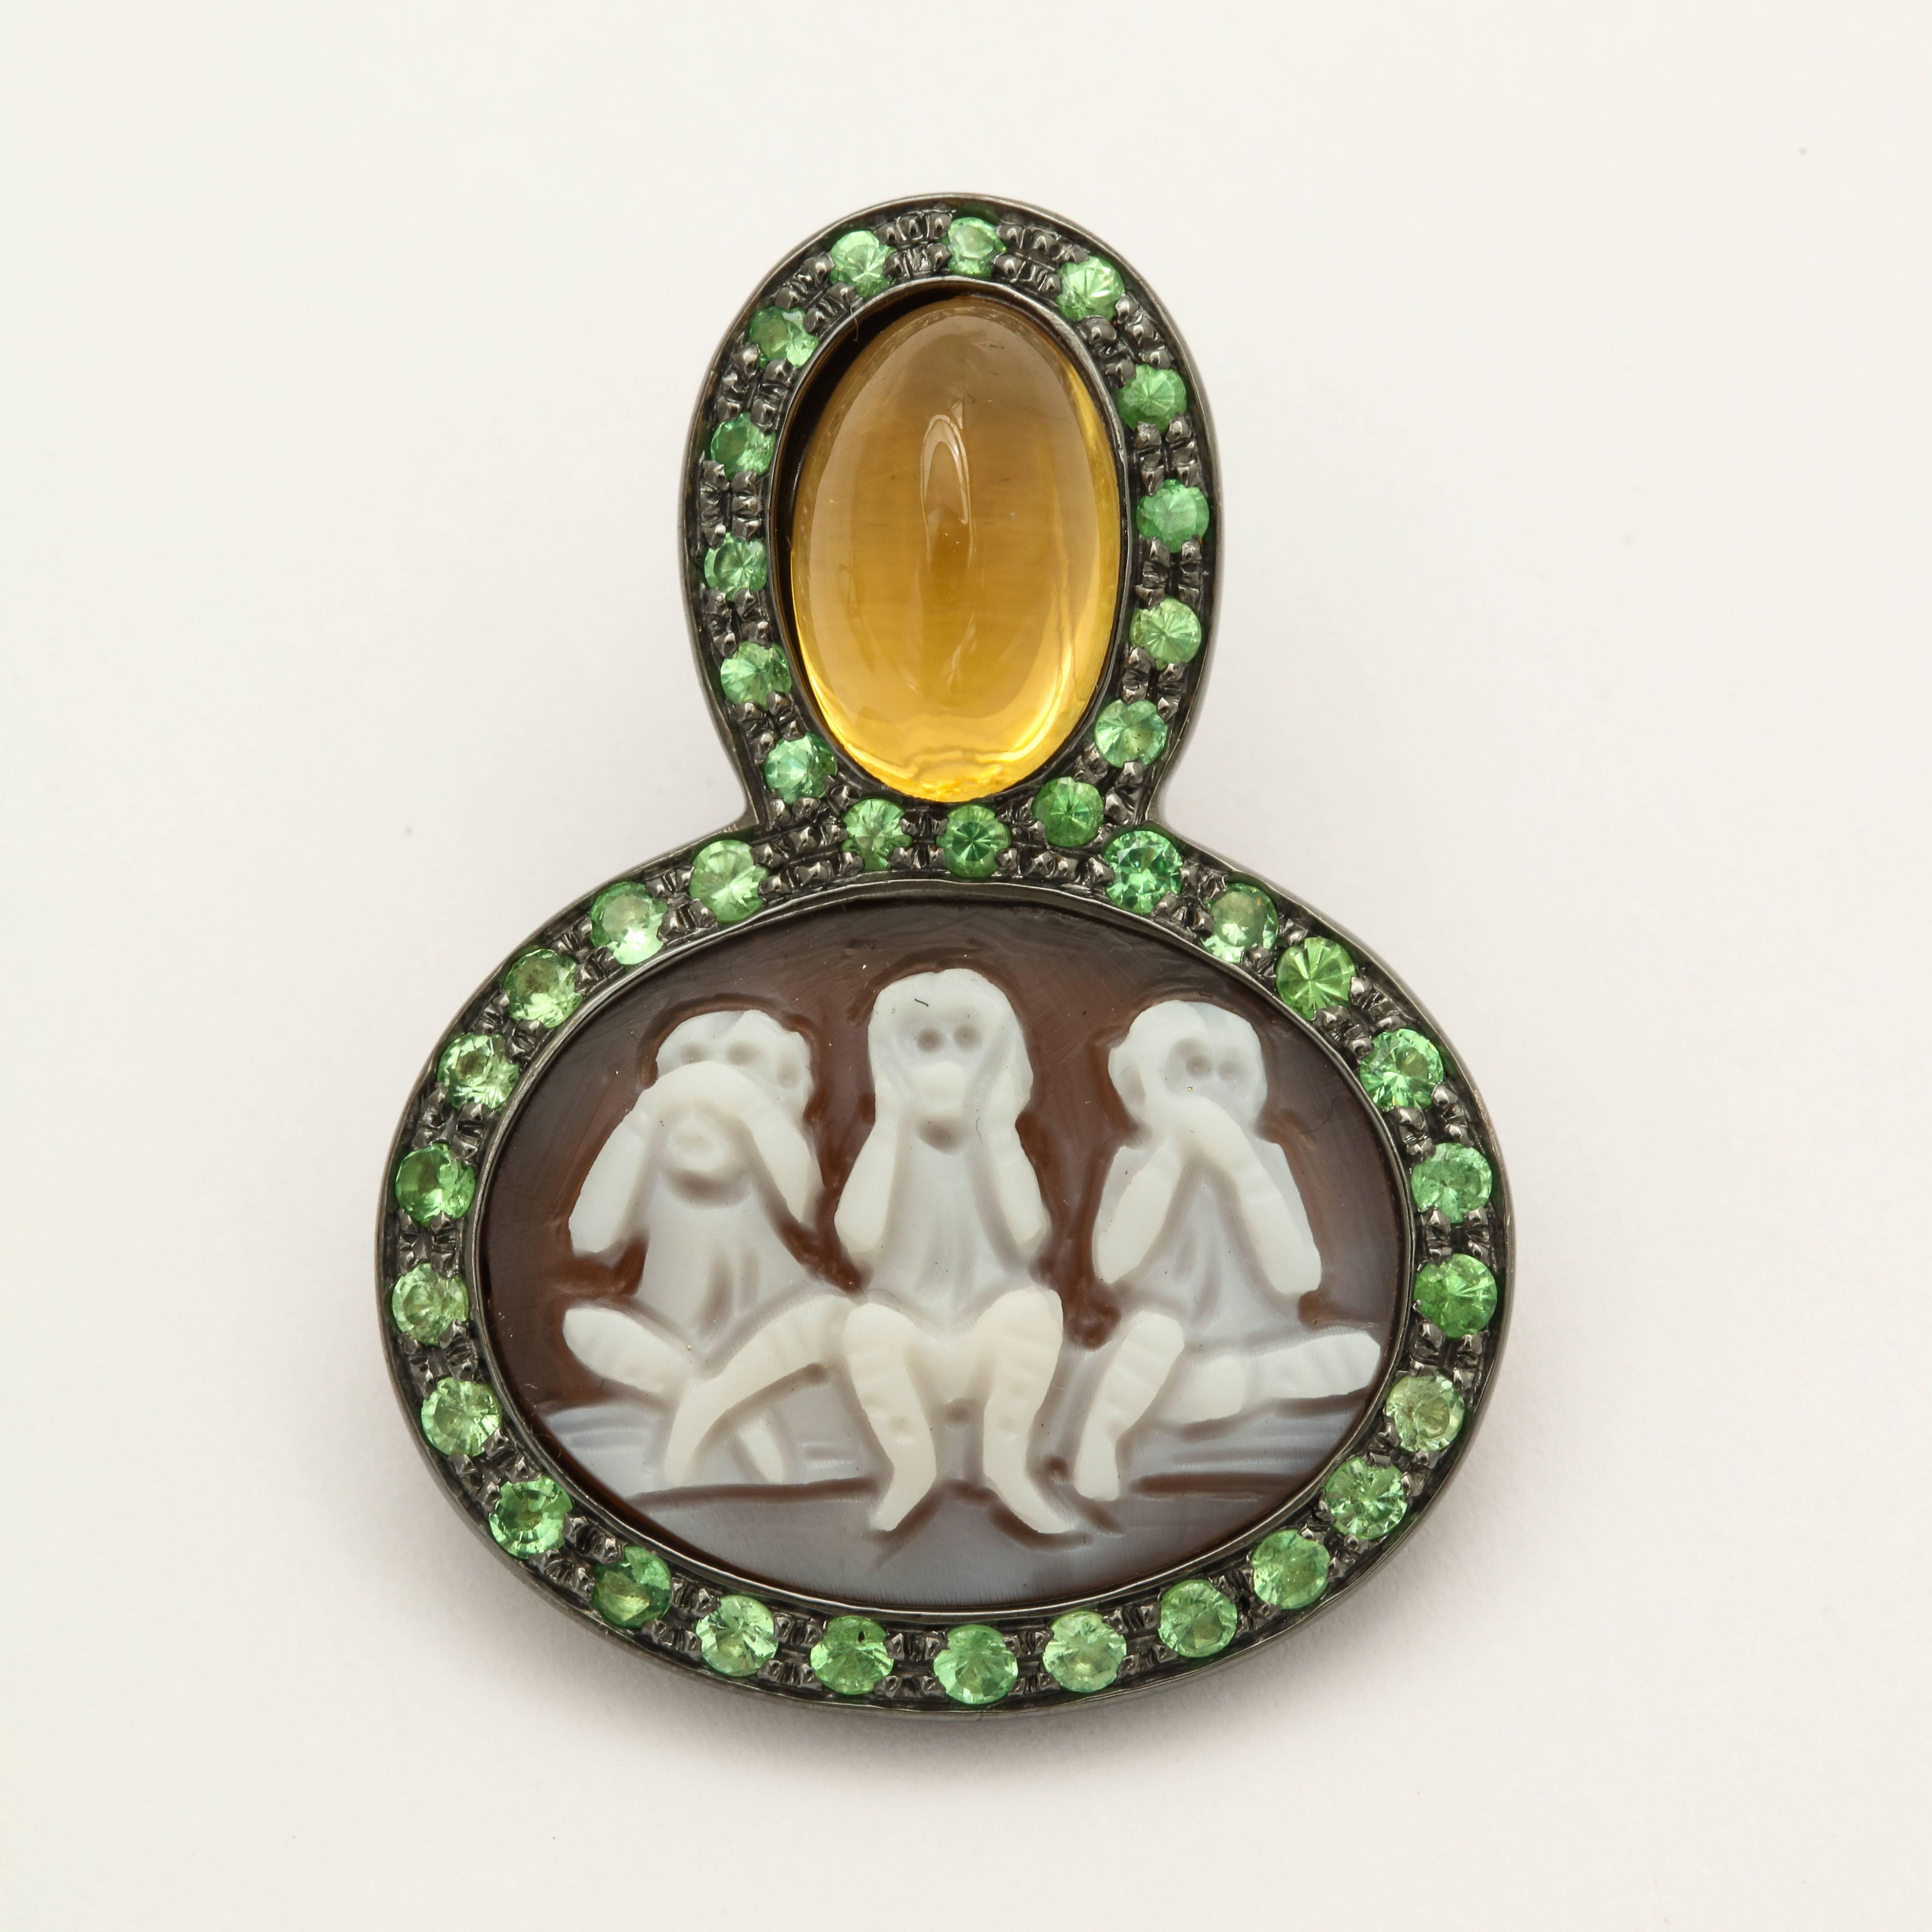 20mm sardonyx shell cameo hand-carved, set in sterling silver, black rhodium plated with 1.71ct tsavorites and 6.36ct citrine. 